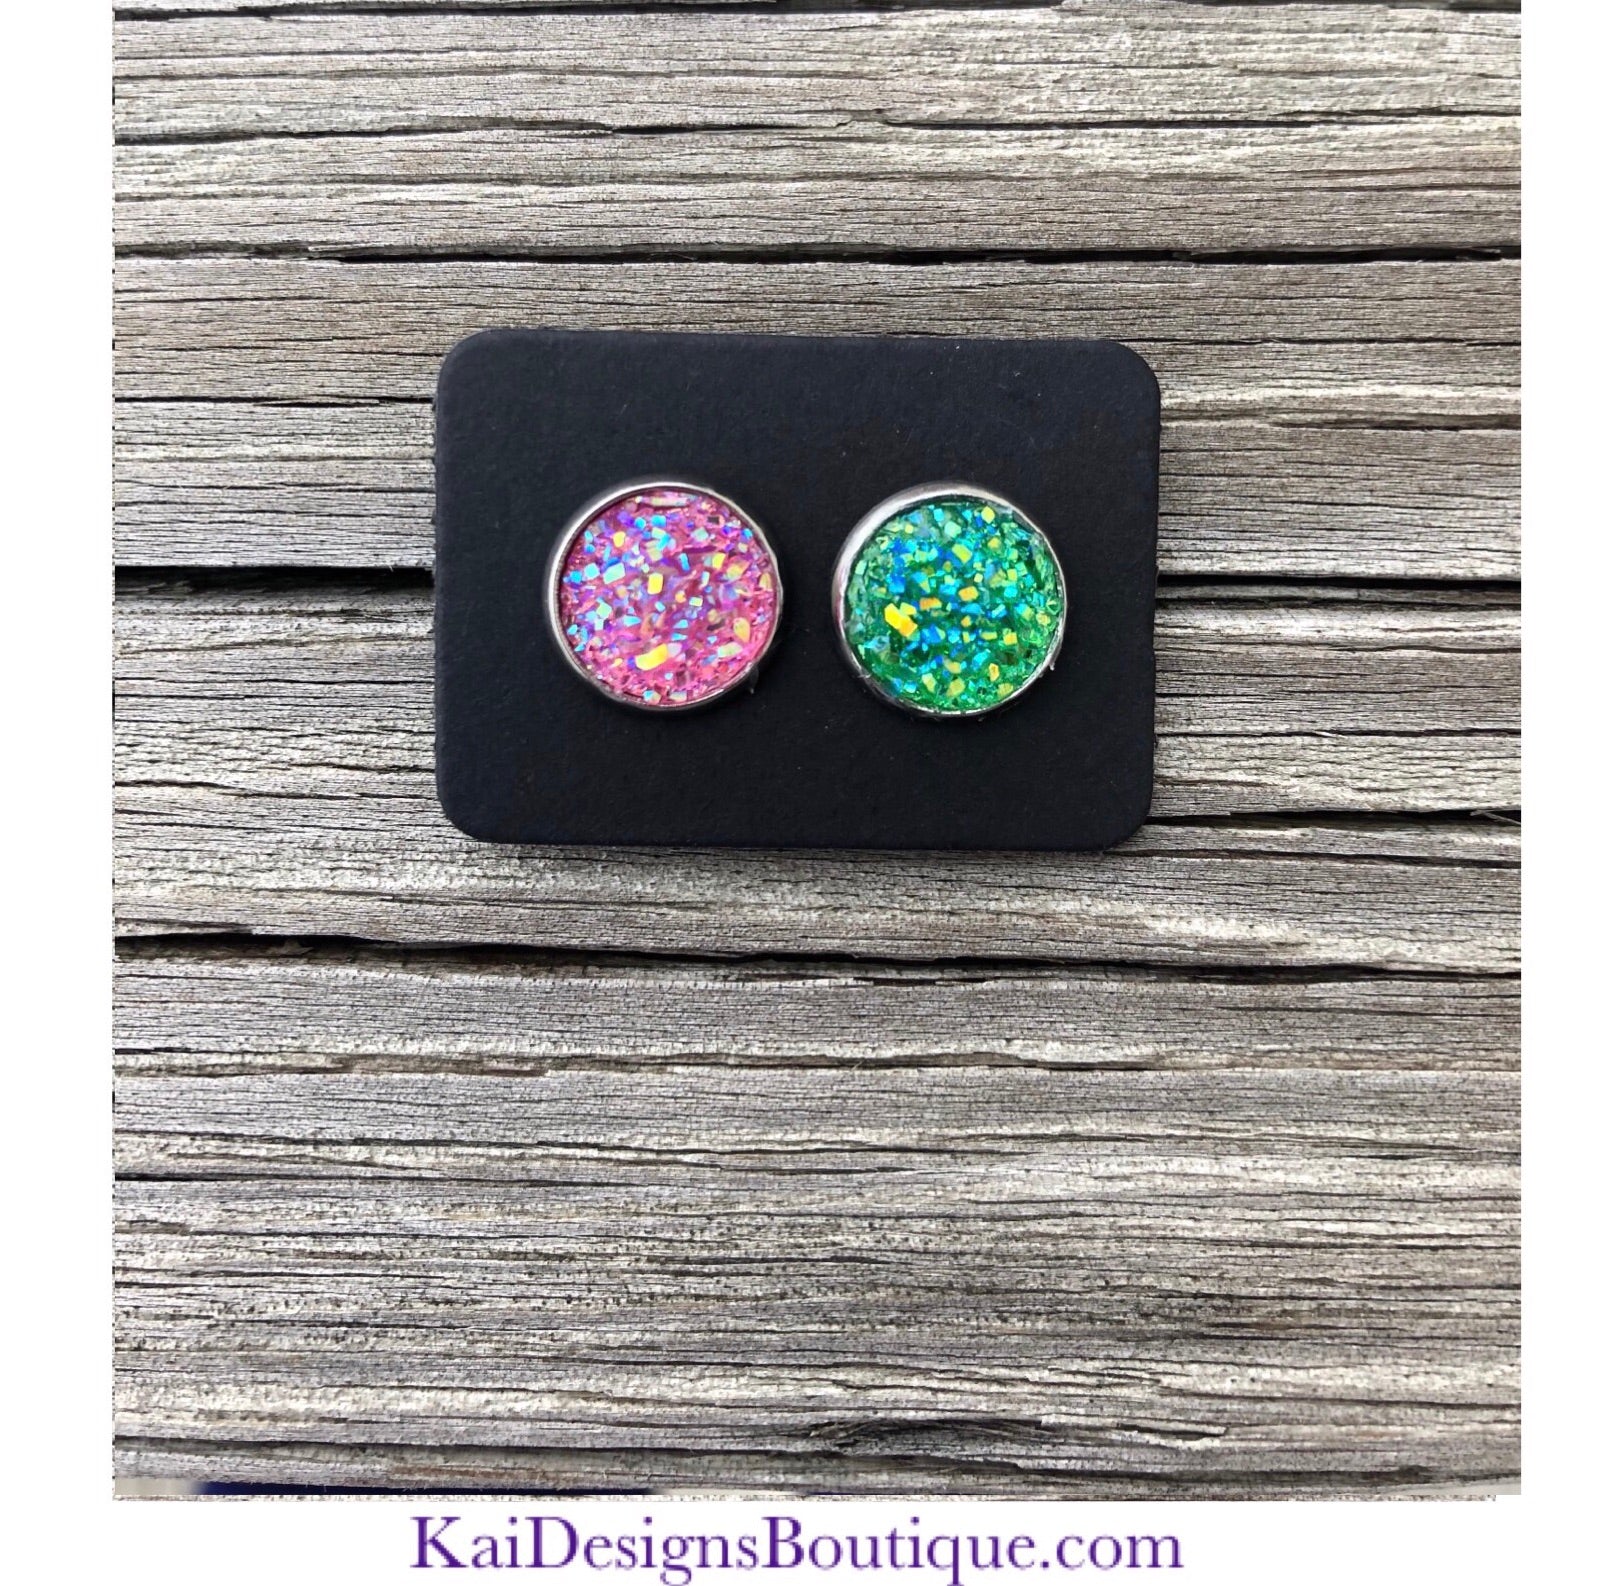 Pink and Green Faux Druzy Earrings